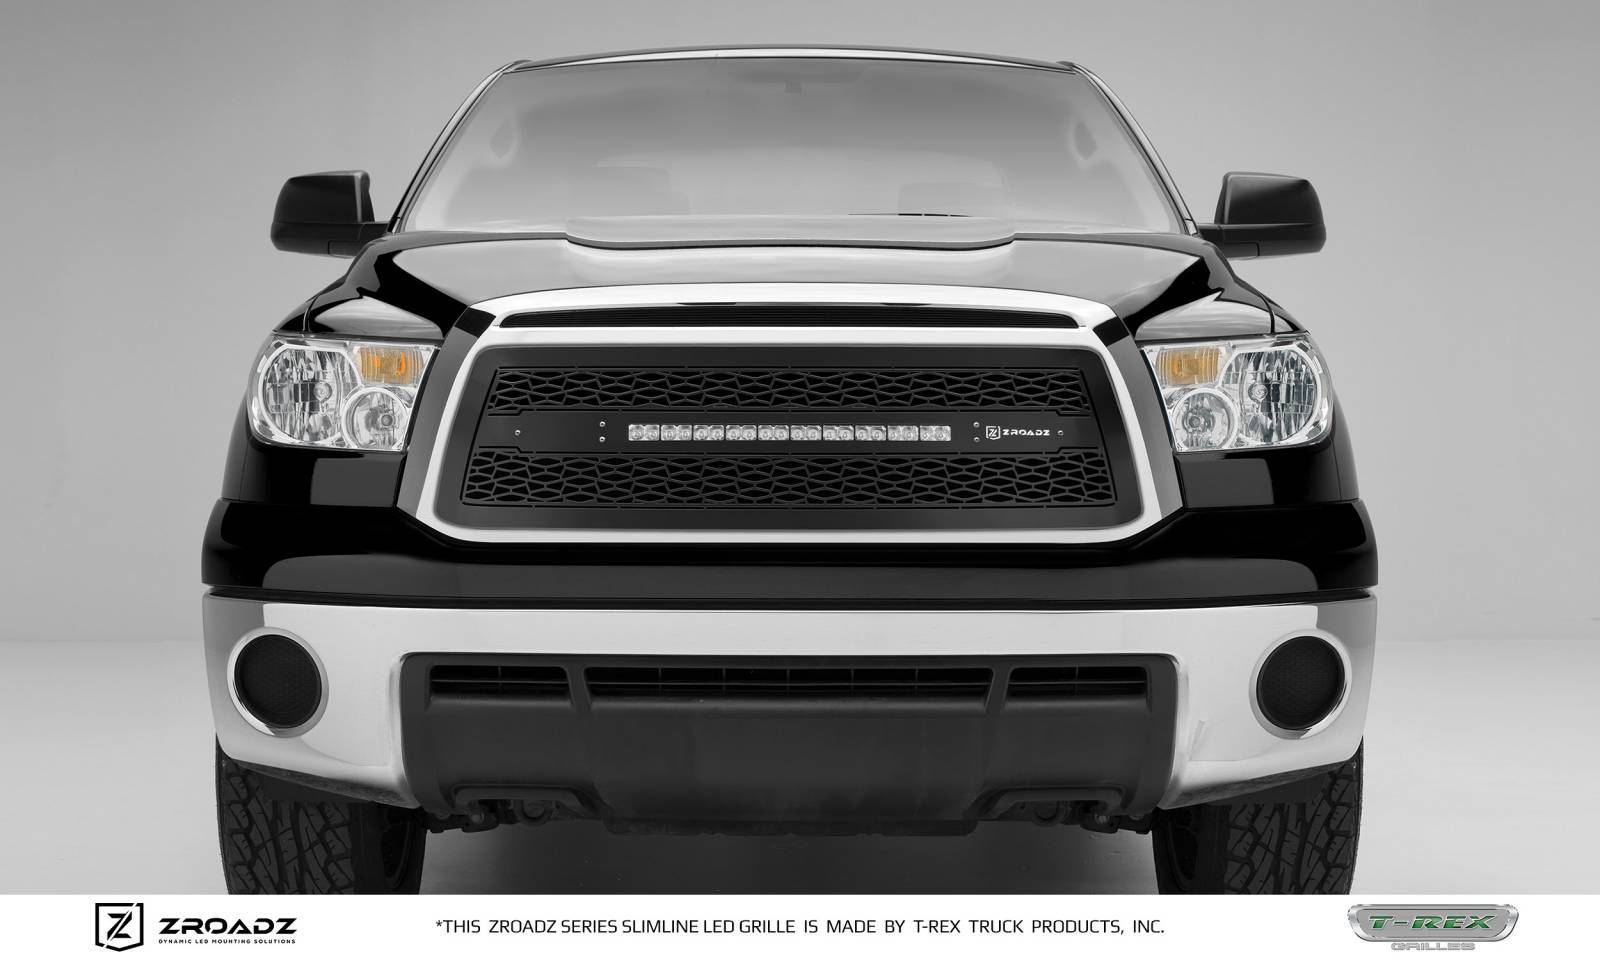 APS Compatible with 2010-2013 Toyota Tundra Main Upper Billet Grille Grill Insert N19-A81766T 